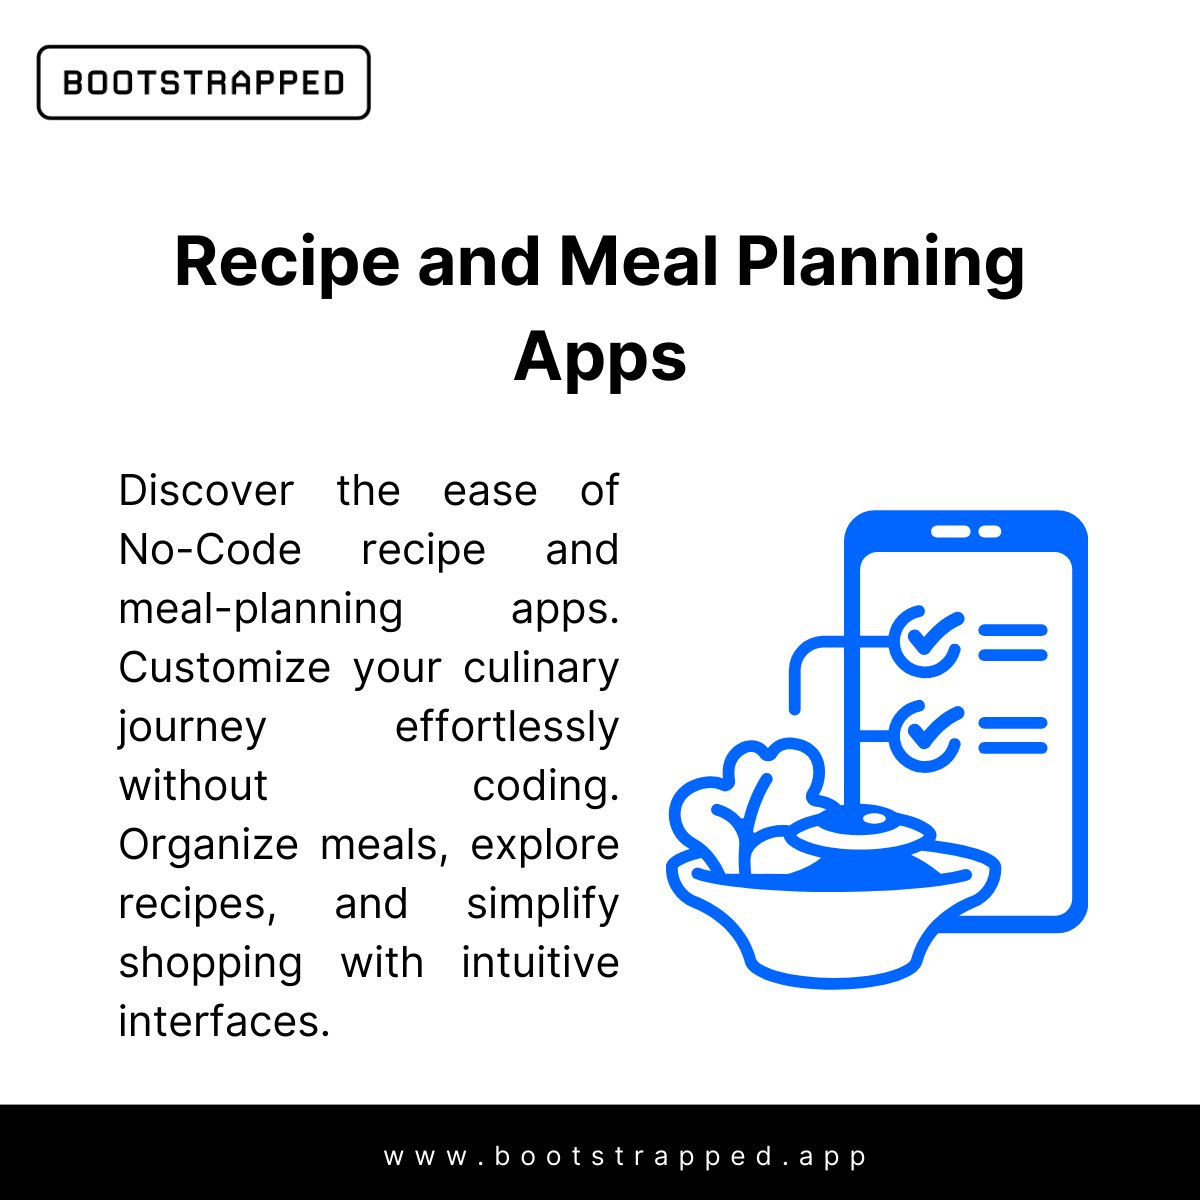 Streamline meal planning with No-Code recipe apps. Customize, plan, and track effortlessly. Explore advanced features with #Adalo, #Bubble, #Thunkable, #Glide, #WeWeb, and #FlutterFlow. Unleash culinary creativity. Visit bootstrapped.app.

#NoCode #MealPlanning #RecipeApps